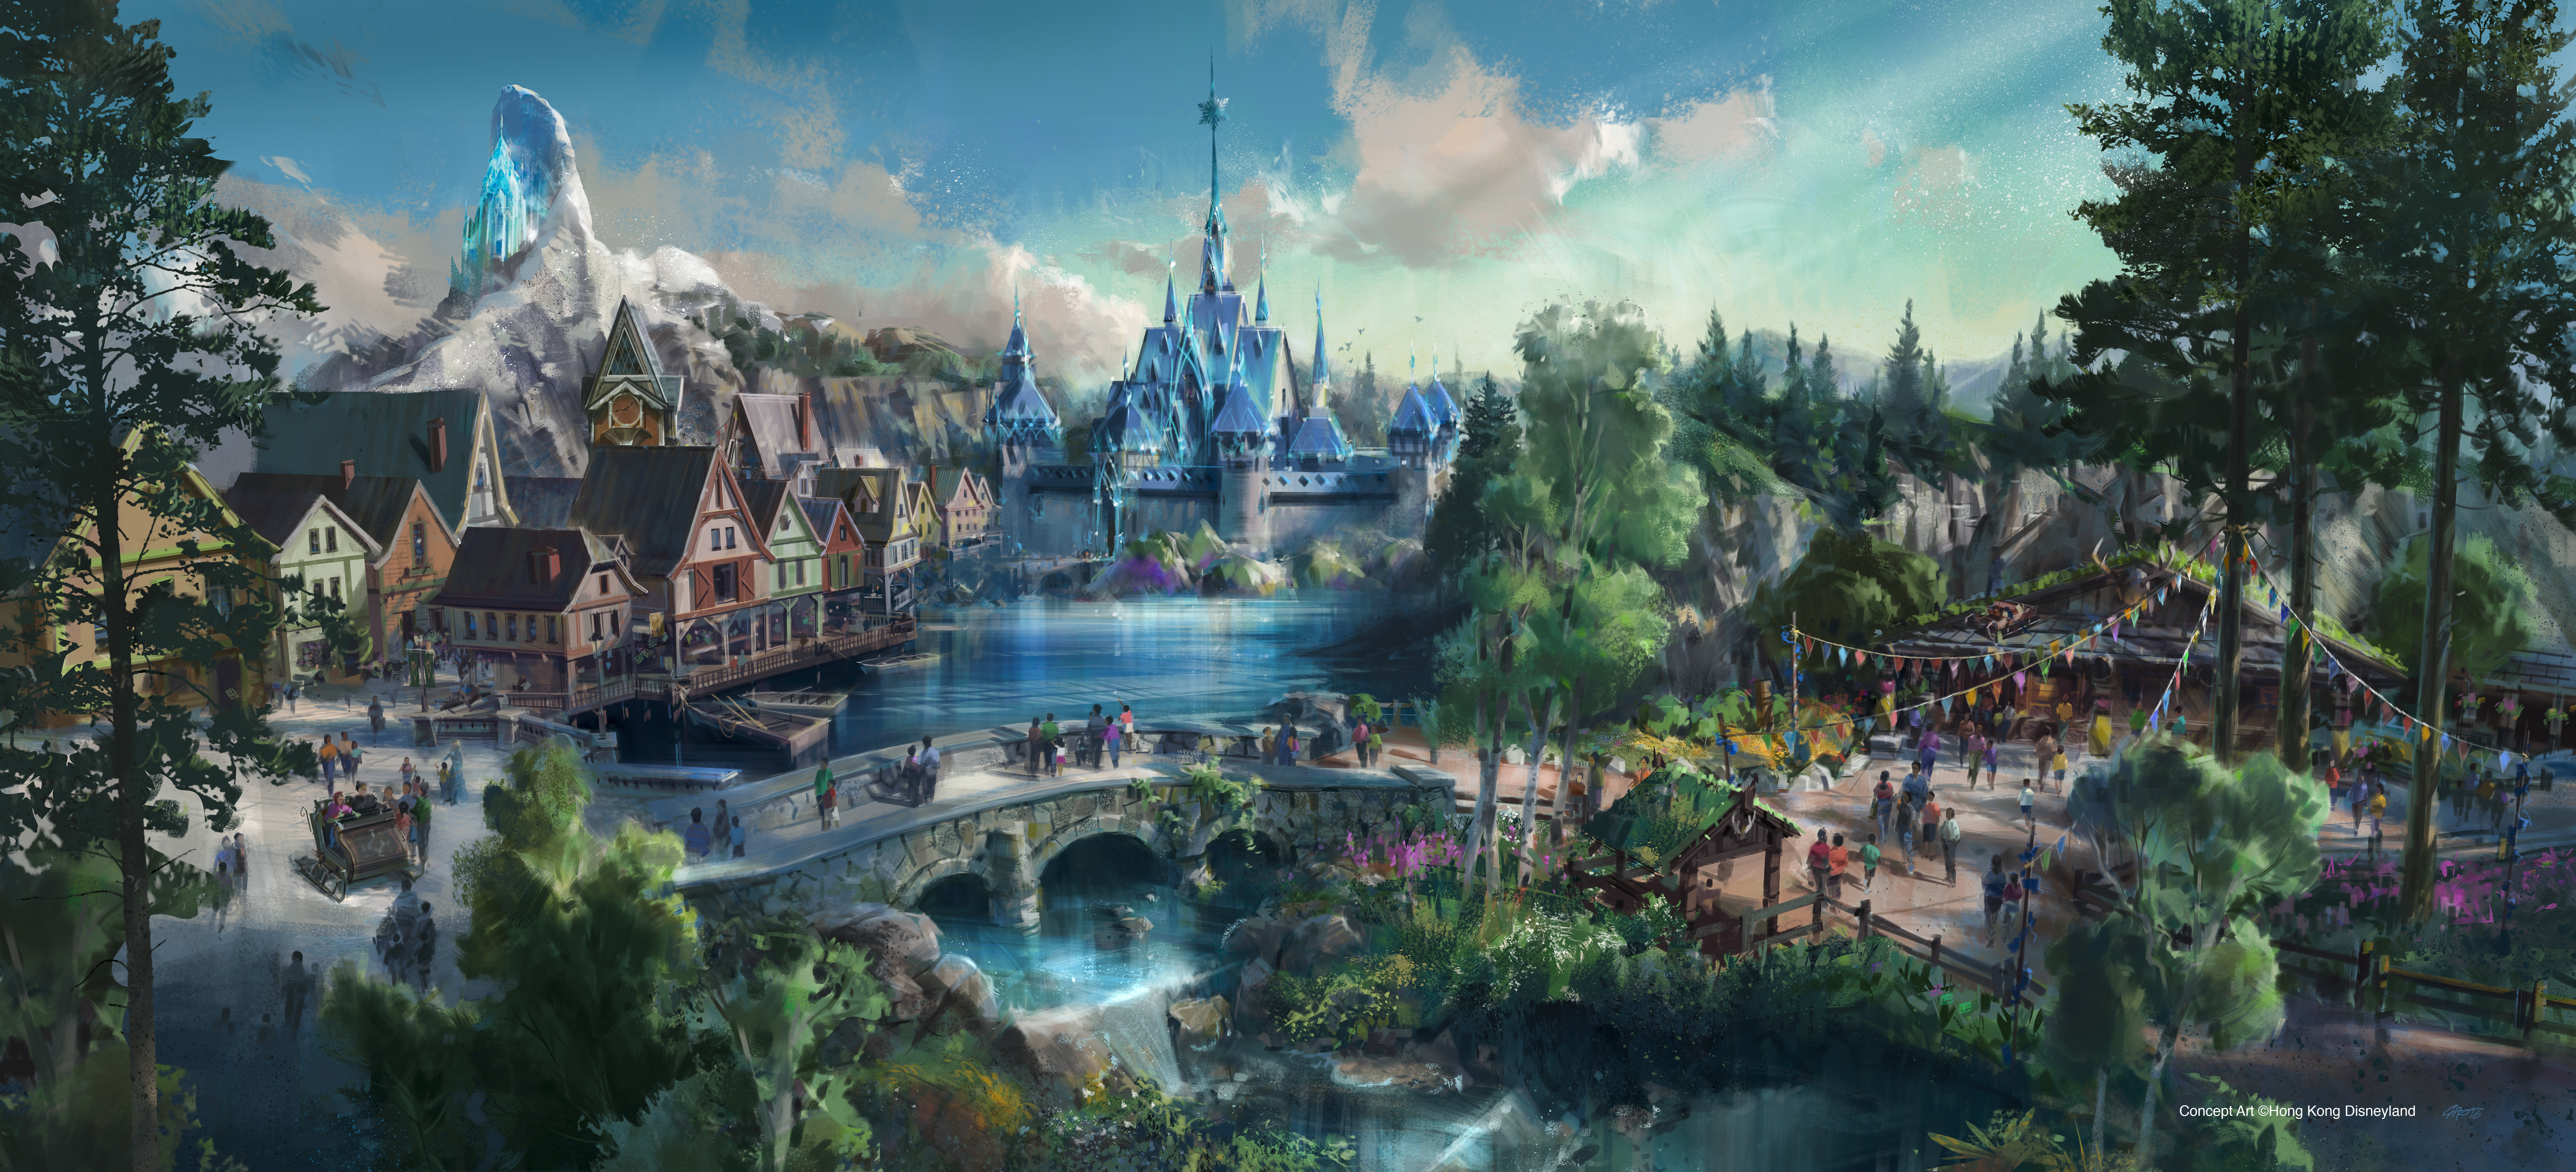 Hong Kong Disneyland Announces Plan for Multi-Year Expansion With New Attractions and Entertainment